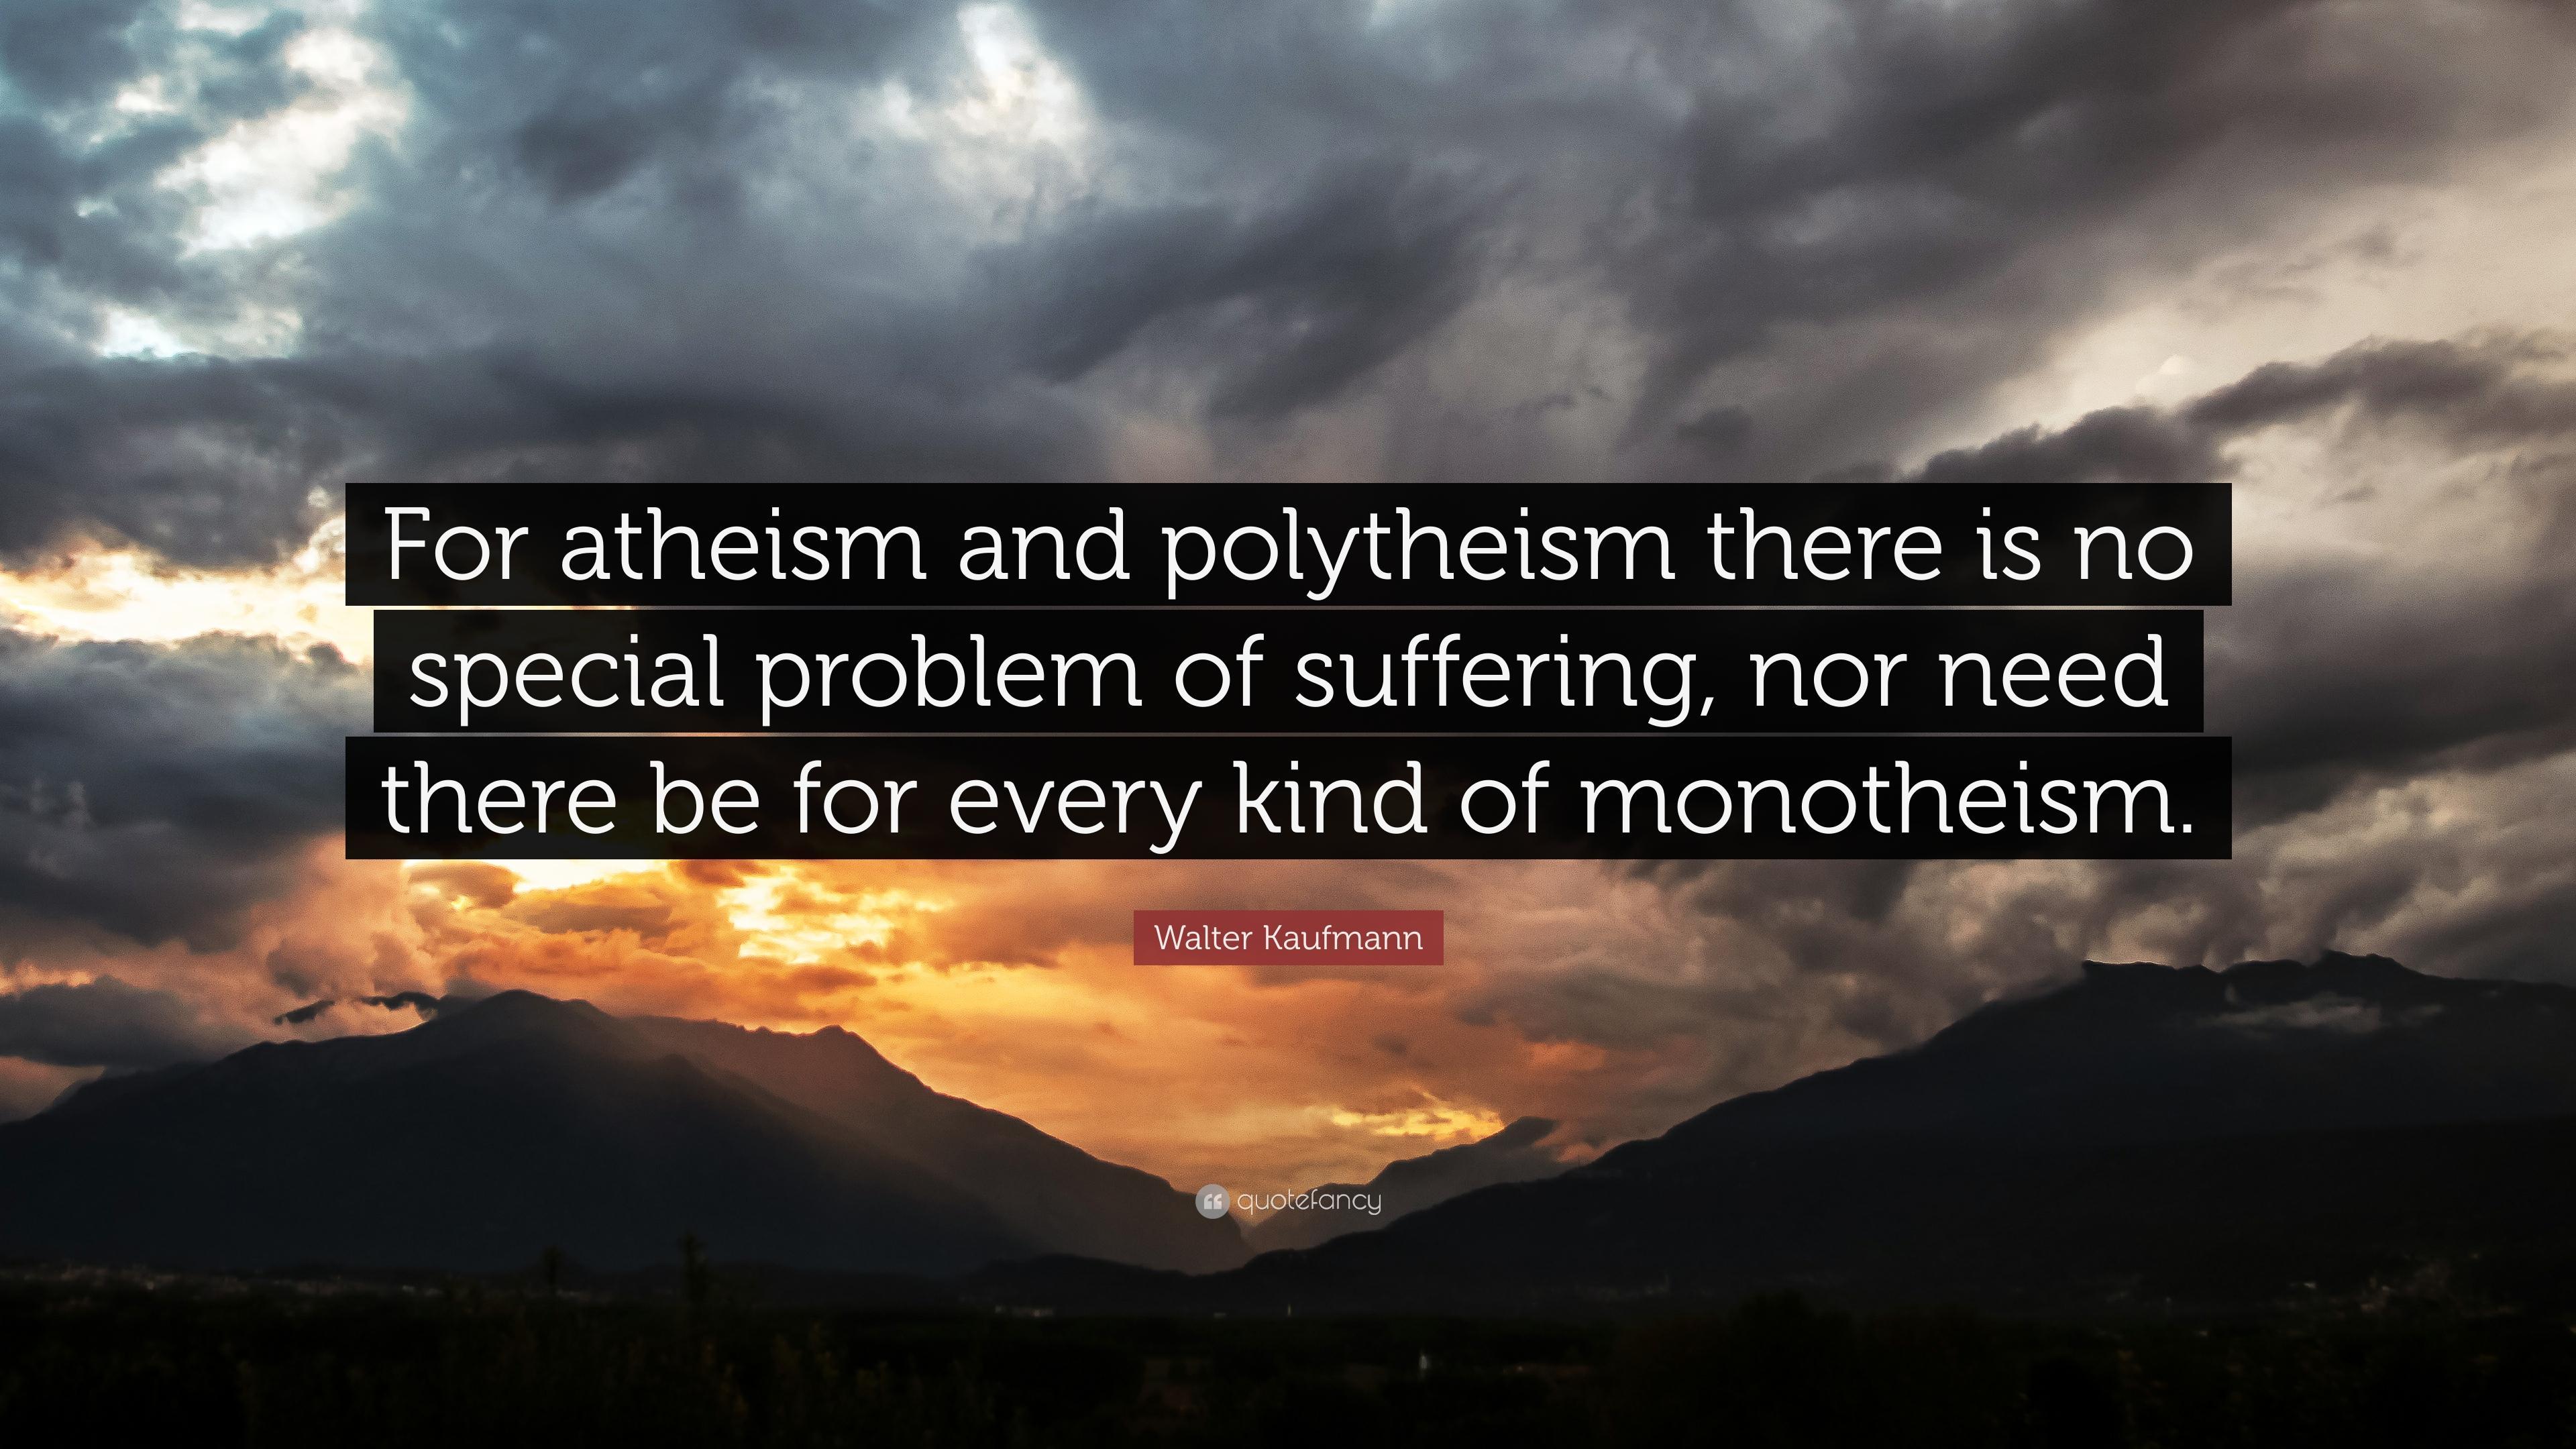 Walter Kaufmann Quote: “For atheism and polytheism there is no